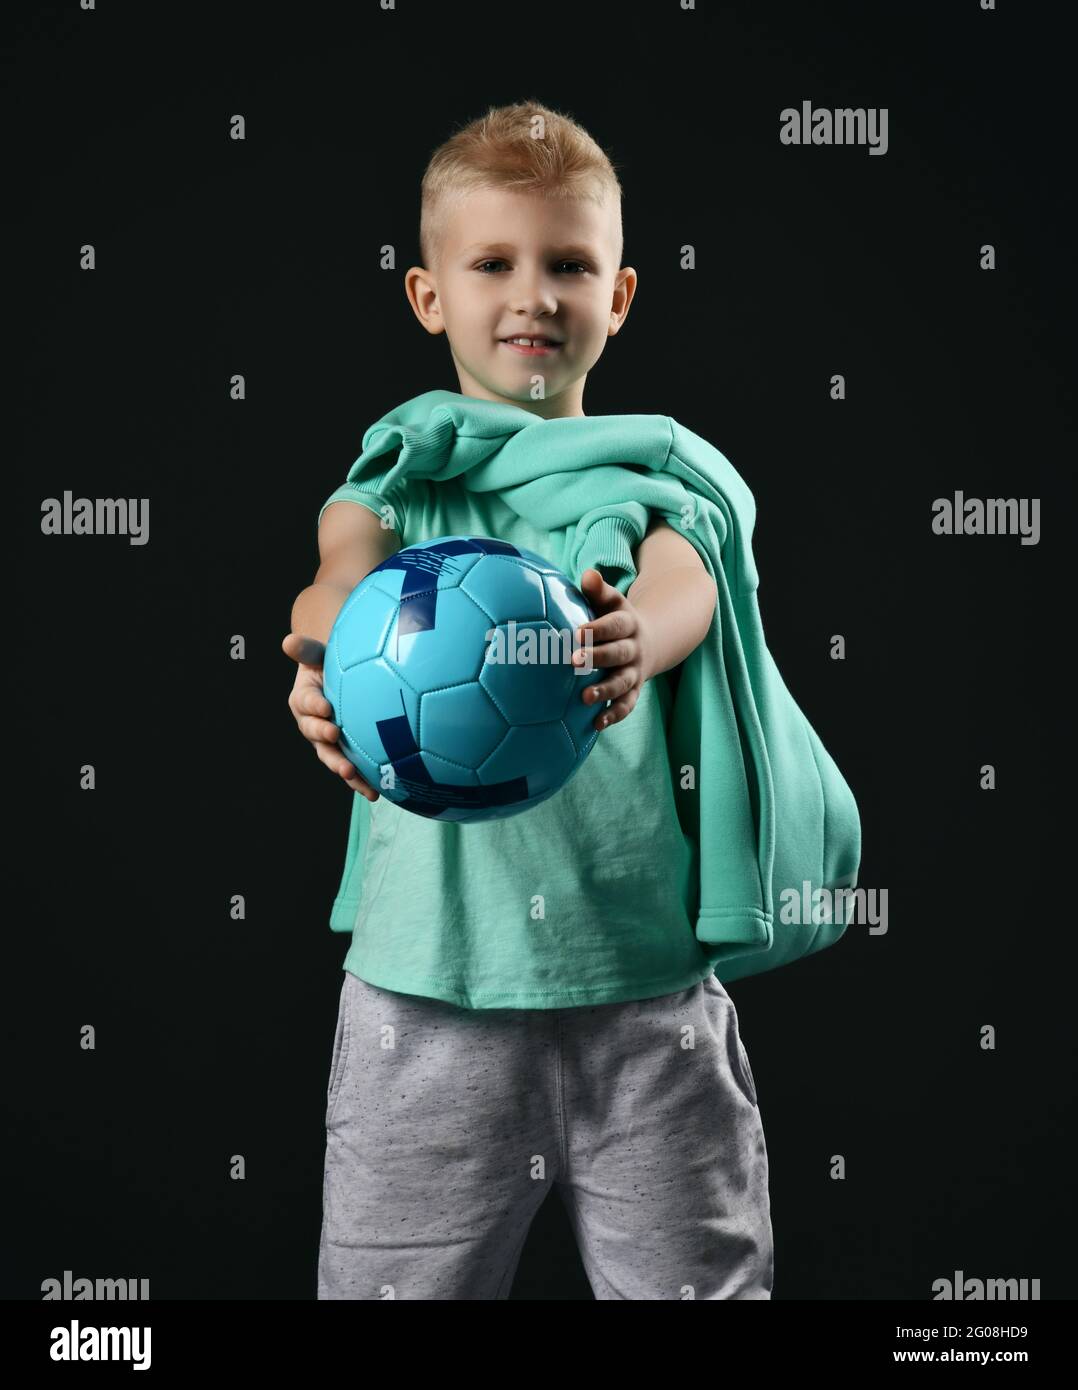 Smiling blond boy child in sports green t-shirt and trousers standing holding soccer ball in hands Stock Photo